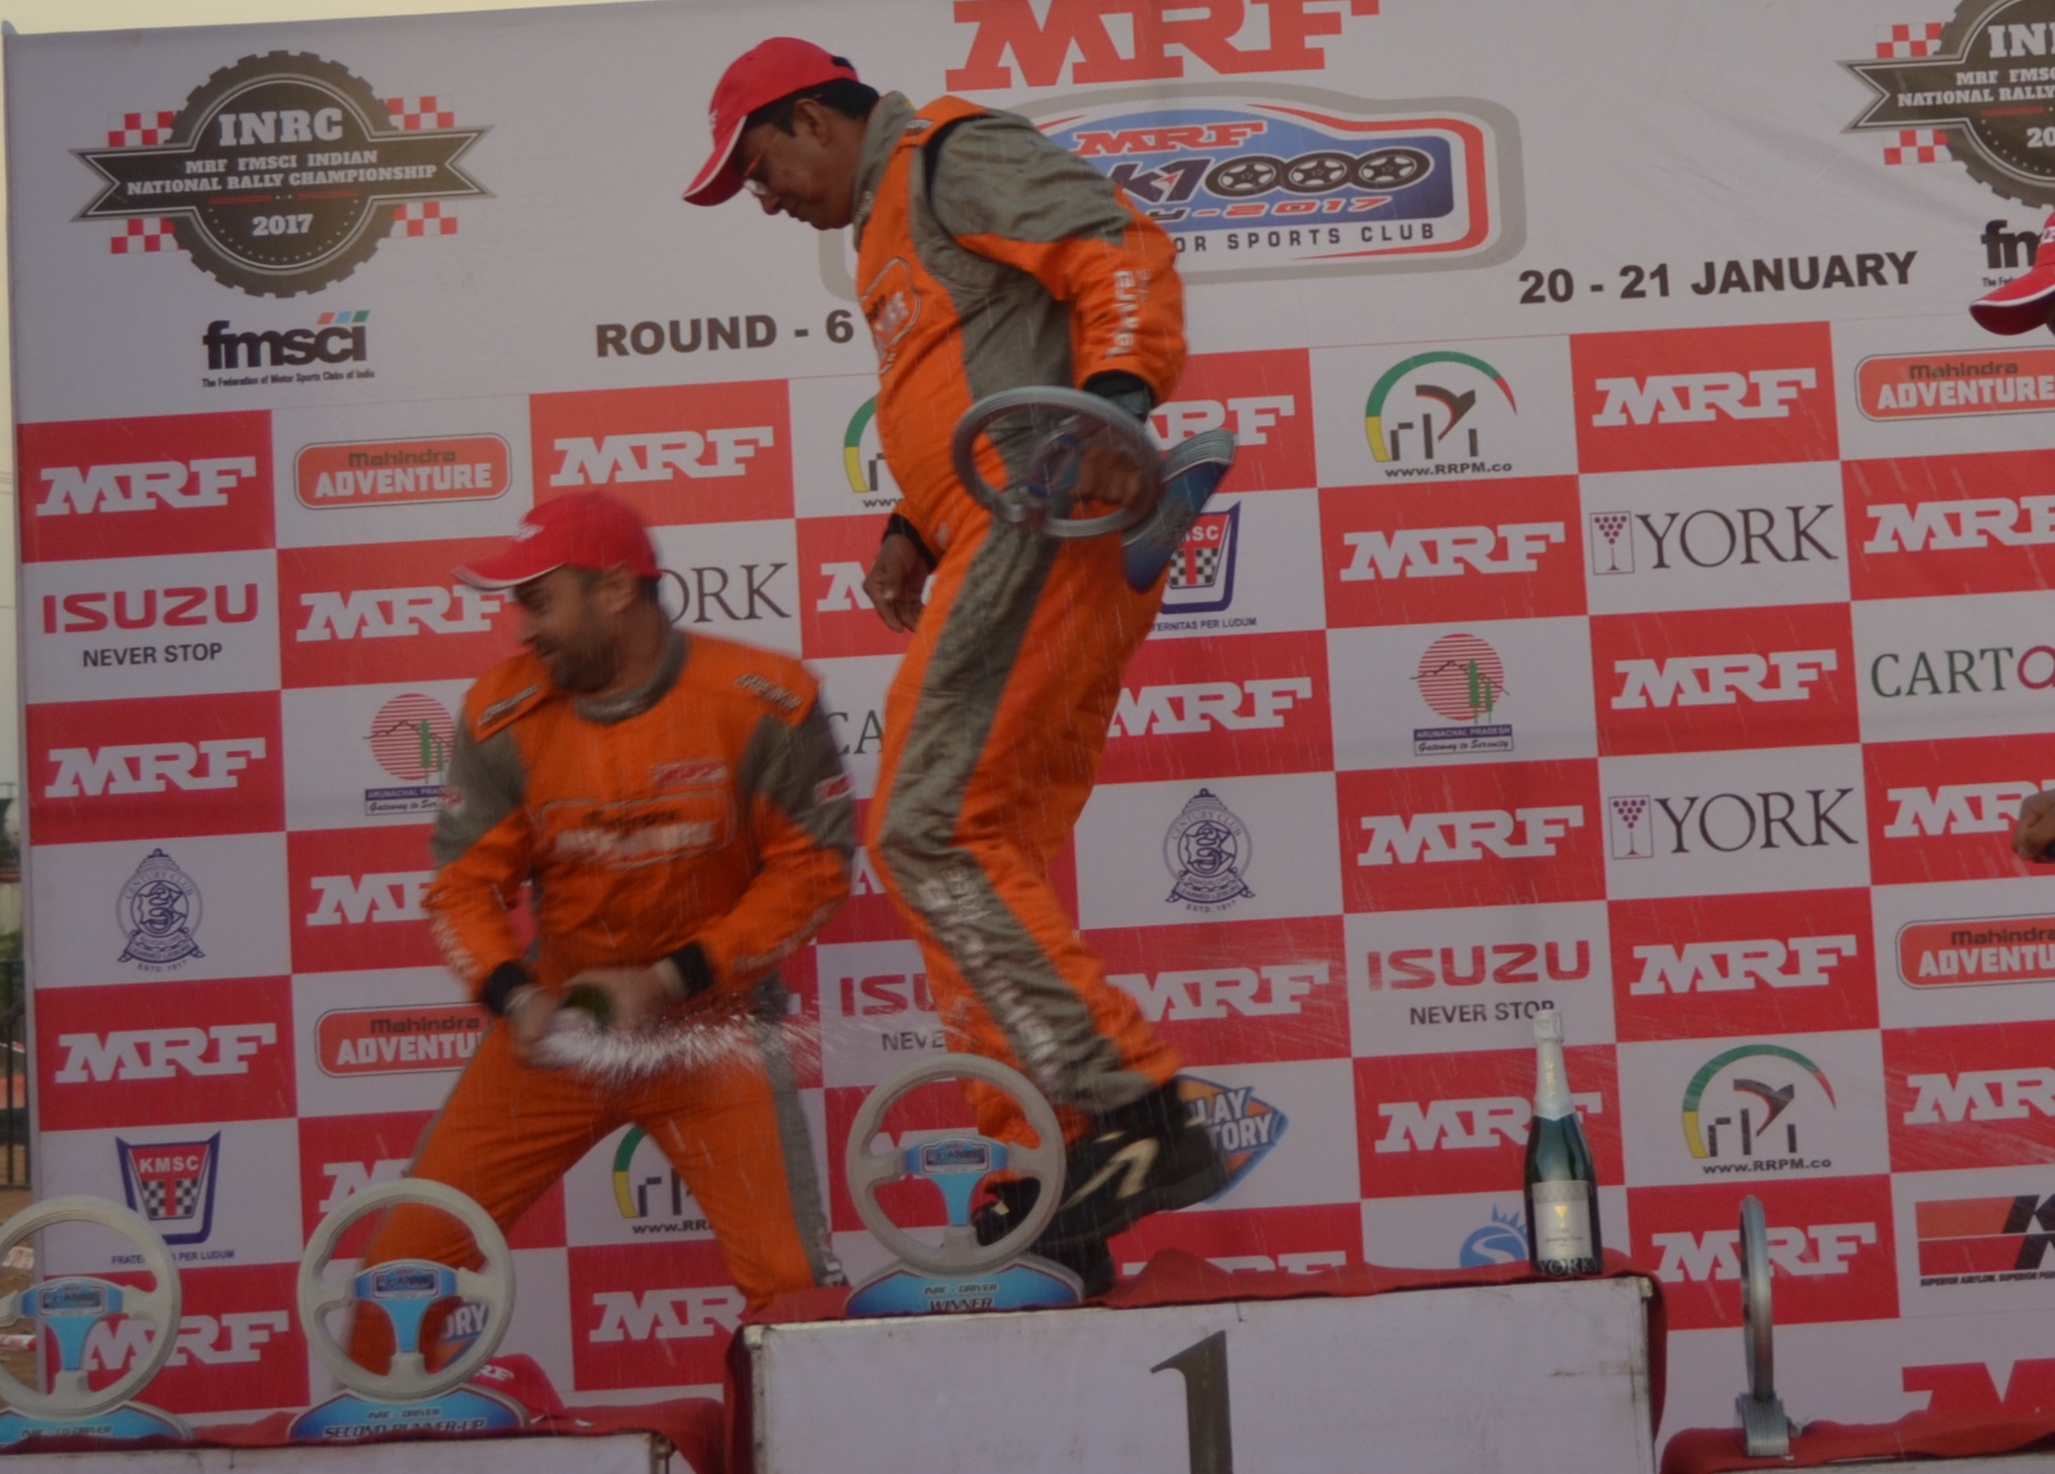 Photo of Gaurav Gill wins MRF fmsci K-1000, clinches fifth National title: Indian National Rally Championship